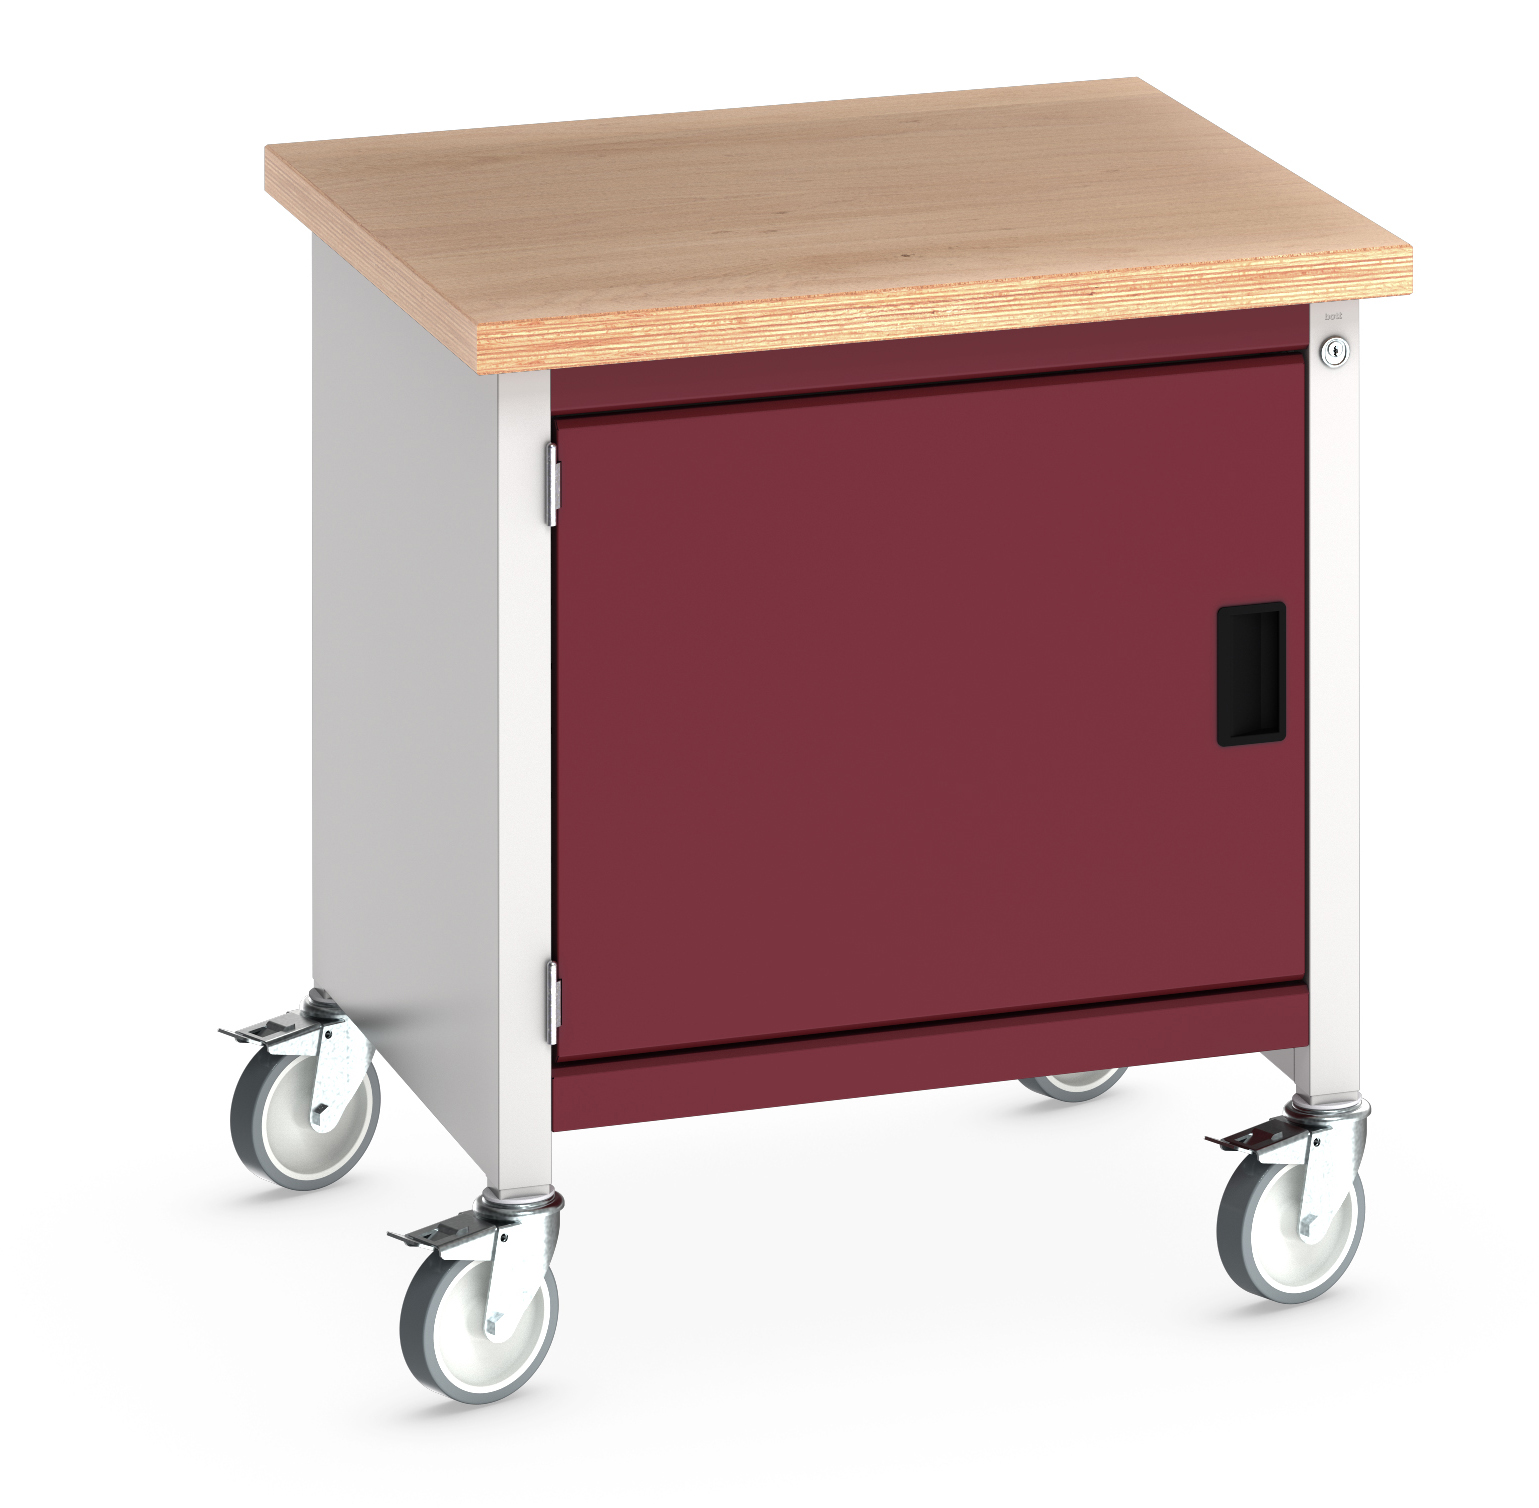 Bott Cubio Mobile Storage Bench With Full Cupboard - 41002085.24V